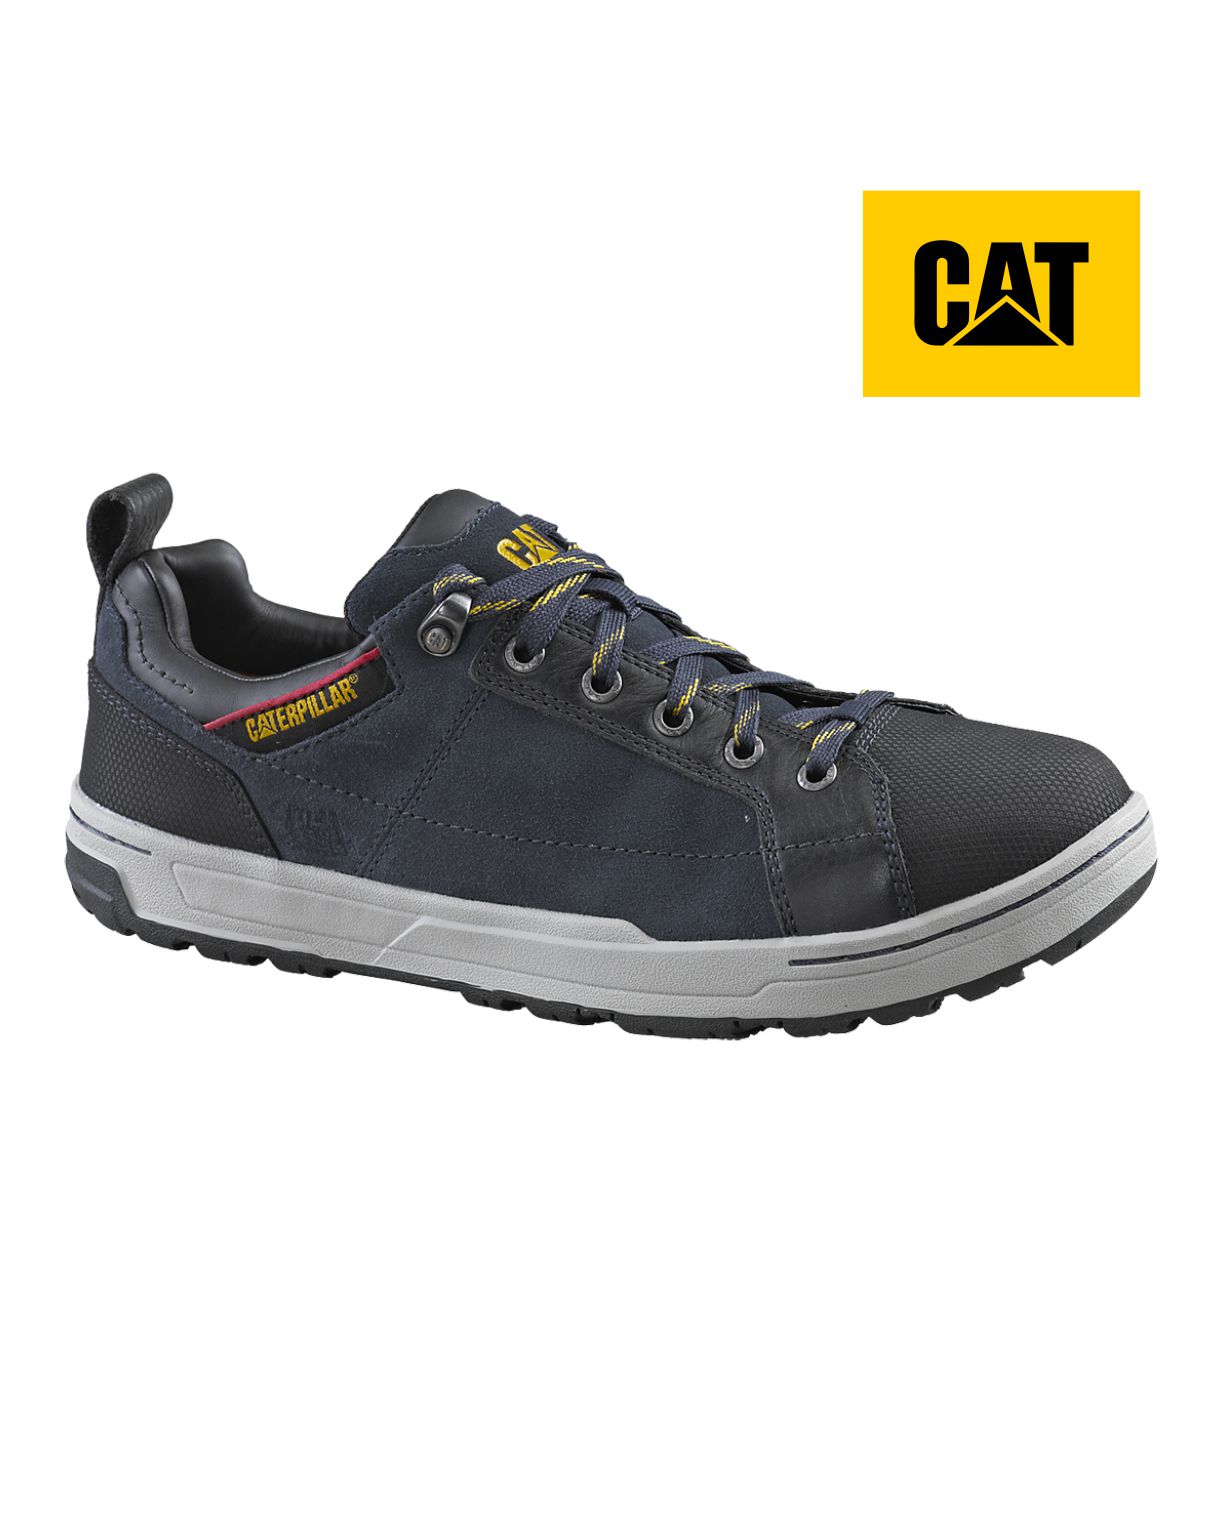 caterpillar safety shoes sale